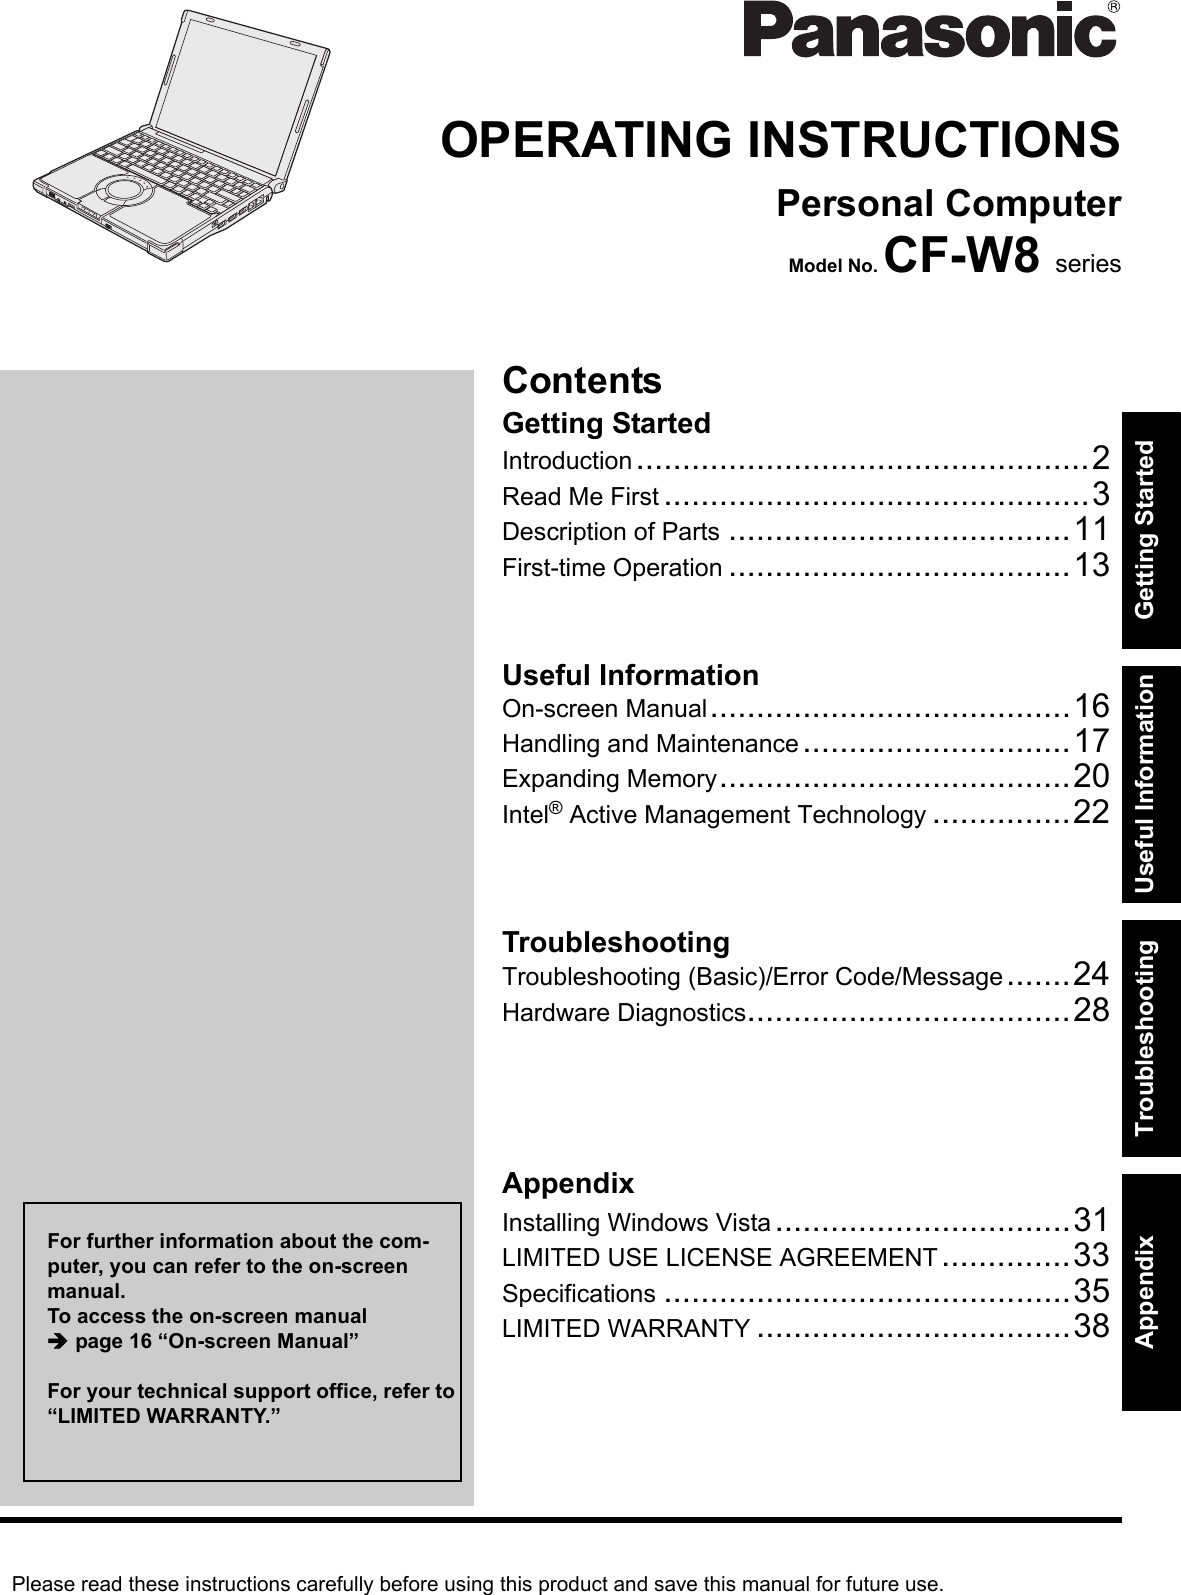 Please read these instructions carefully before using this product and save this manual for future use.ContentsGetting StartedUseful InformationTroubleshootingGetting StartedUseful InformationTroubleshootingAppendixAppendixOPERATING INSTRUCTIONSPersonal ComputerModel No. CF-W8 seriesIntroduction.................................................2Read Me First ..............................................3Description of Parts .....................................11First-time Operation .....................................13On-screen Manual.......................................16Handling and Maintenance.............................17Expanding Memory......................................20Intel® Active Management Technology ...............22Troubleshooting (Basic)/Error Code/Message.......24Hardware Diagnostics...................................28Installing Windows Vista................................31LIMITED USE LICENSE AGREEMENT..............33Specifications ............................................35LIMITED WARRANTY ..................................38For further information about the com-puter, you can refer to the on-screen manual.To access the on-screen manual Îpage 16 “On-screen Manual”For your technical support office, refer to “LIMITED WARRANTY.”